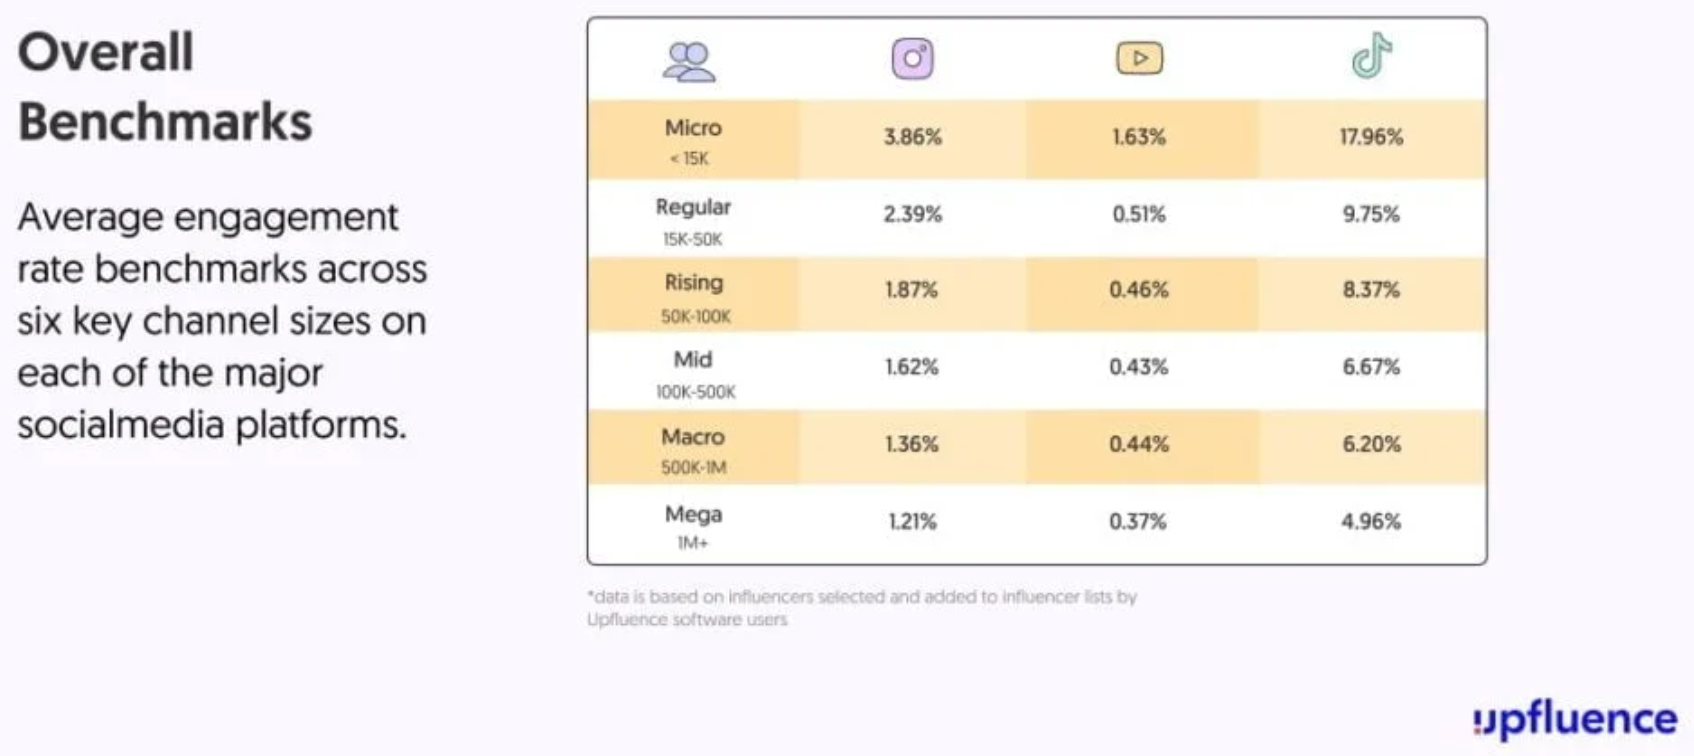 Average engagement rate benchamrks across six key channel sizes on each of the major social media platforms. 